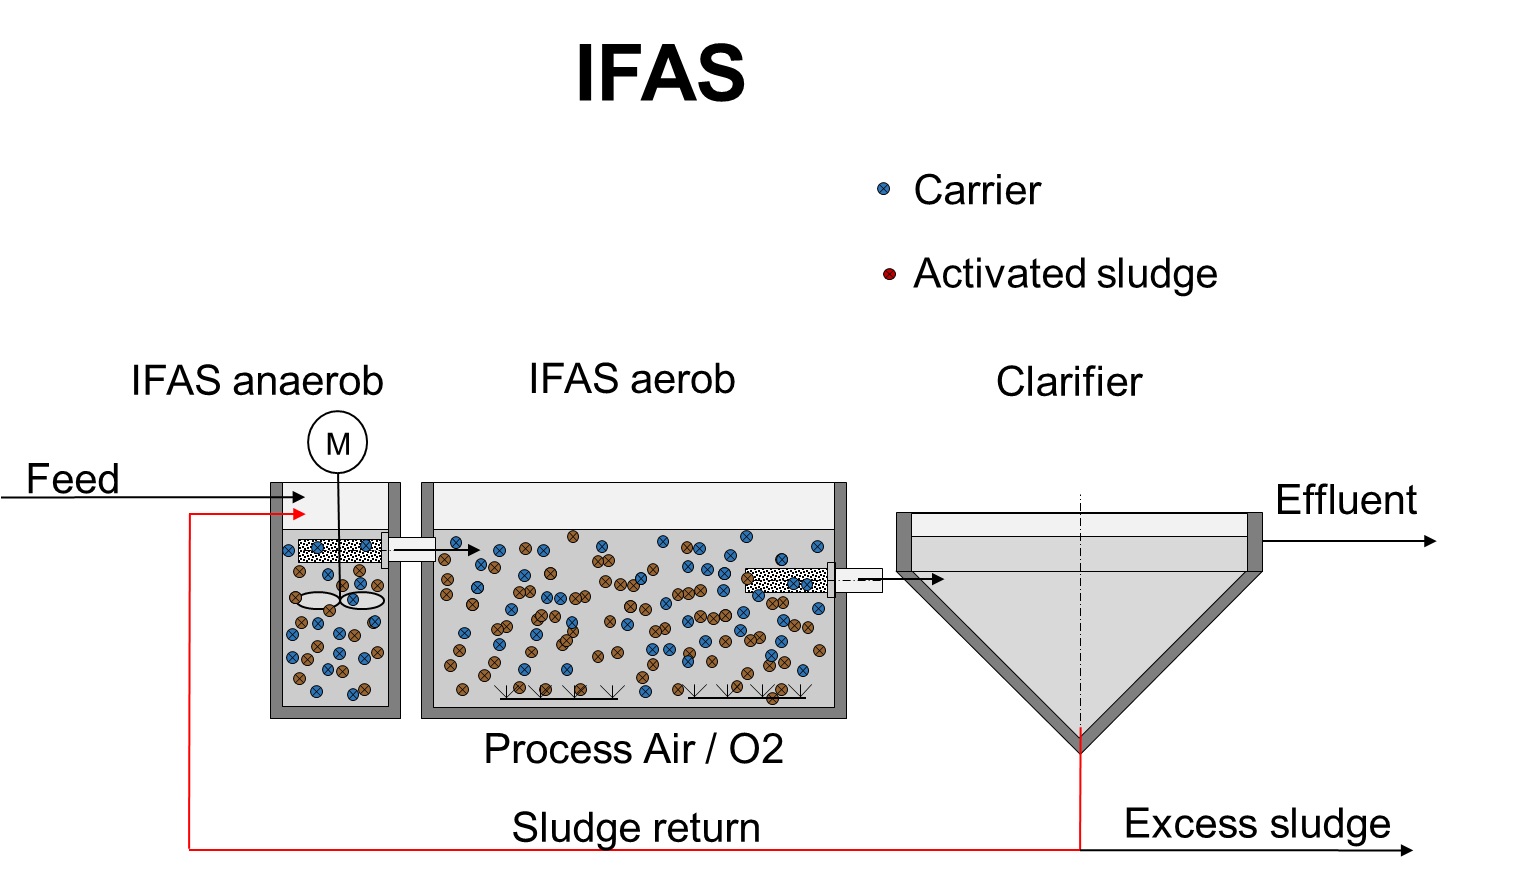 The integrated fixed film activated sludge (IFAS) system.